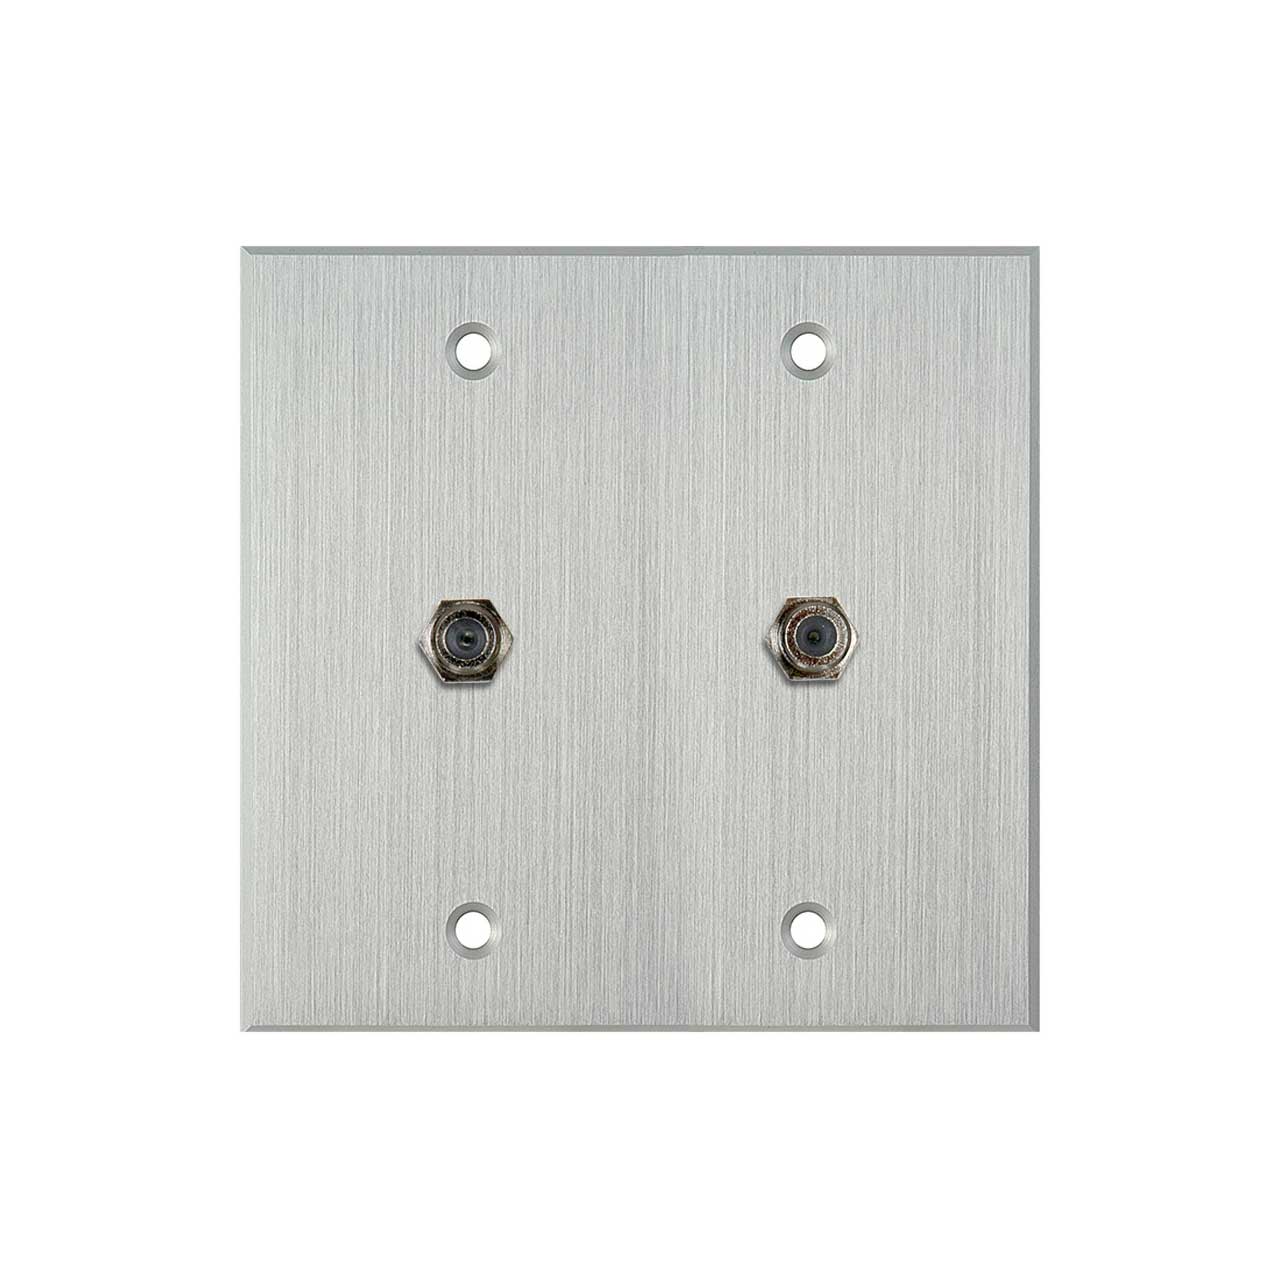 My Custom Shop WPCA-2102 2-Gang Clear Anodized Wall Plate w/ Two F- Female Barrel Connectors  WPCA-2102